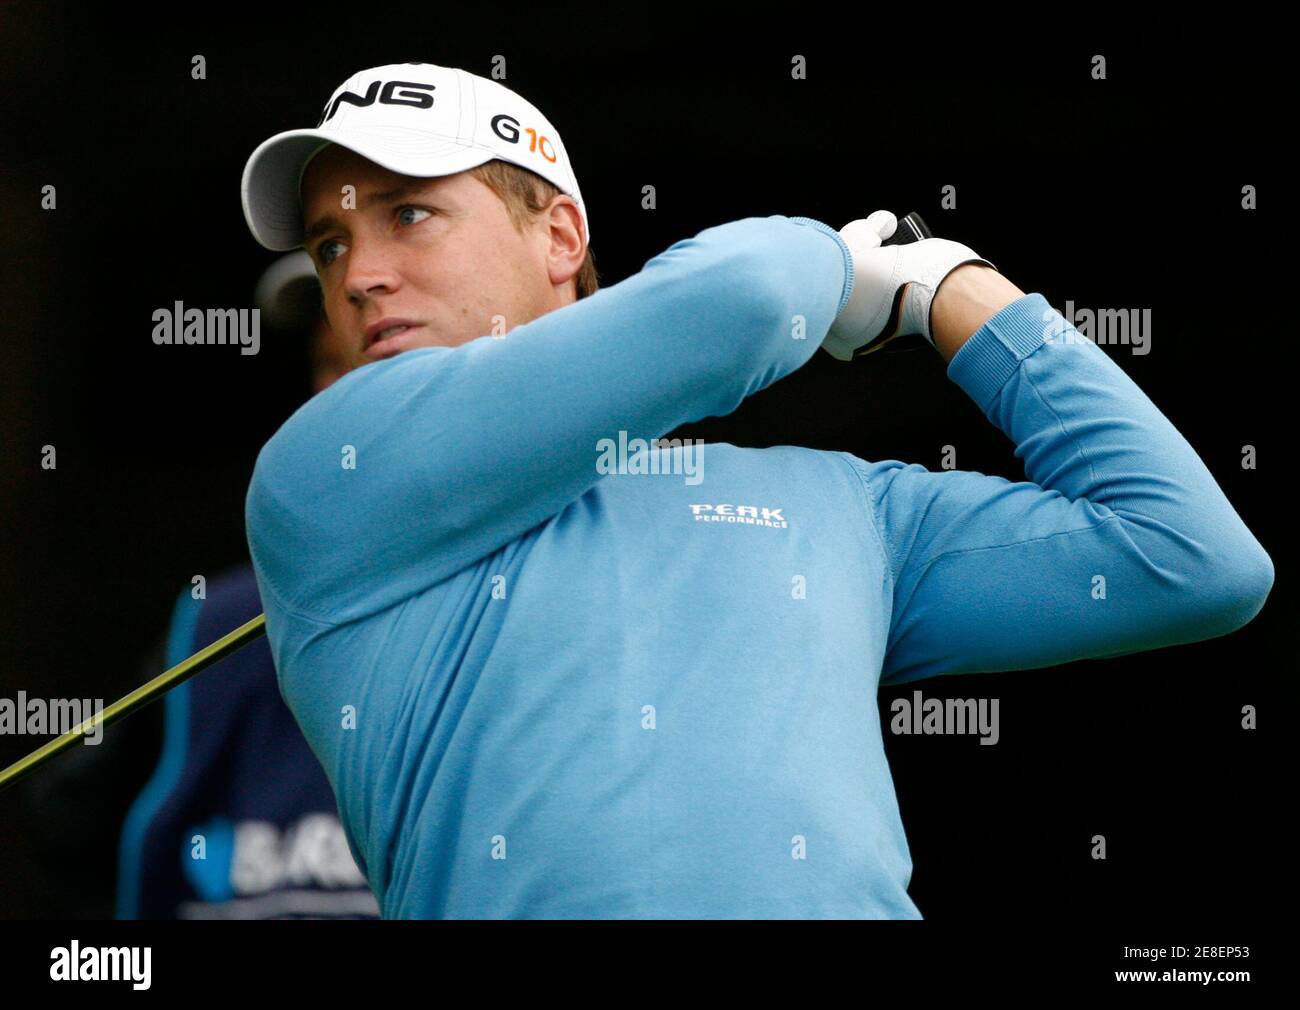 Sweden's Alexander Noren tees off at the third hole during his second round of the Scottish Open golf tournament at Loch Lommond near Glasgow, Scotland, July 11, 2008. REUTERS/David Moir (BRITAIN) Stock Photo